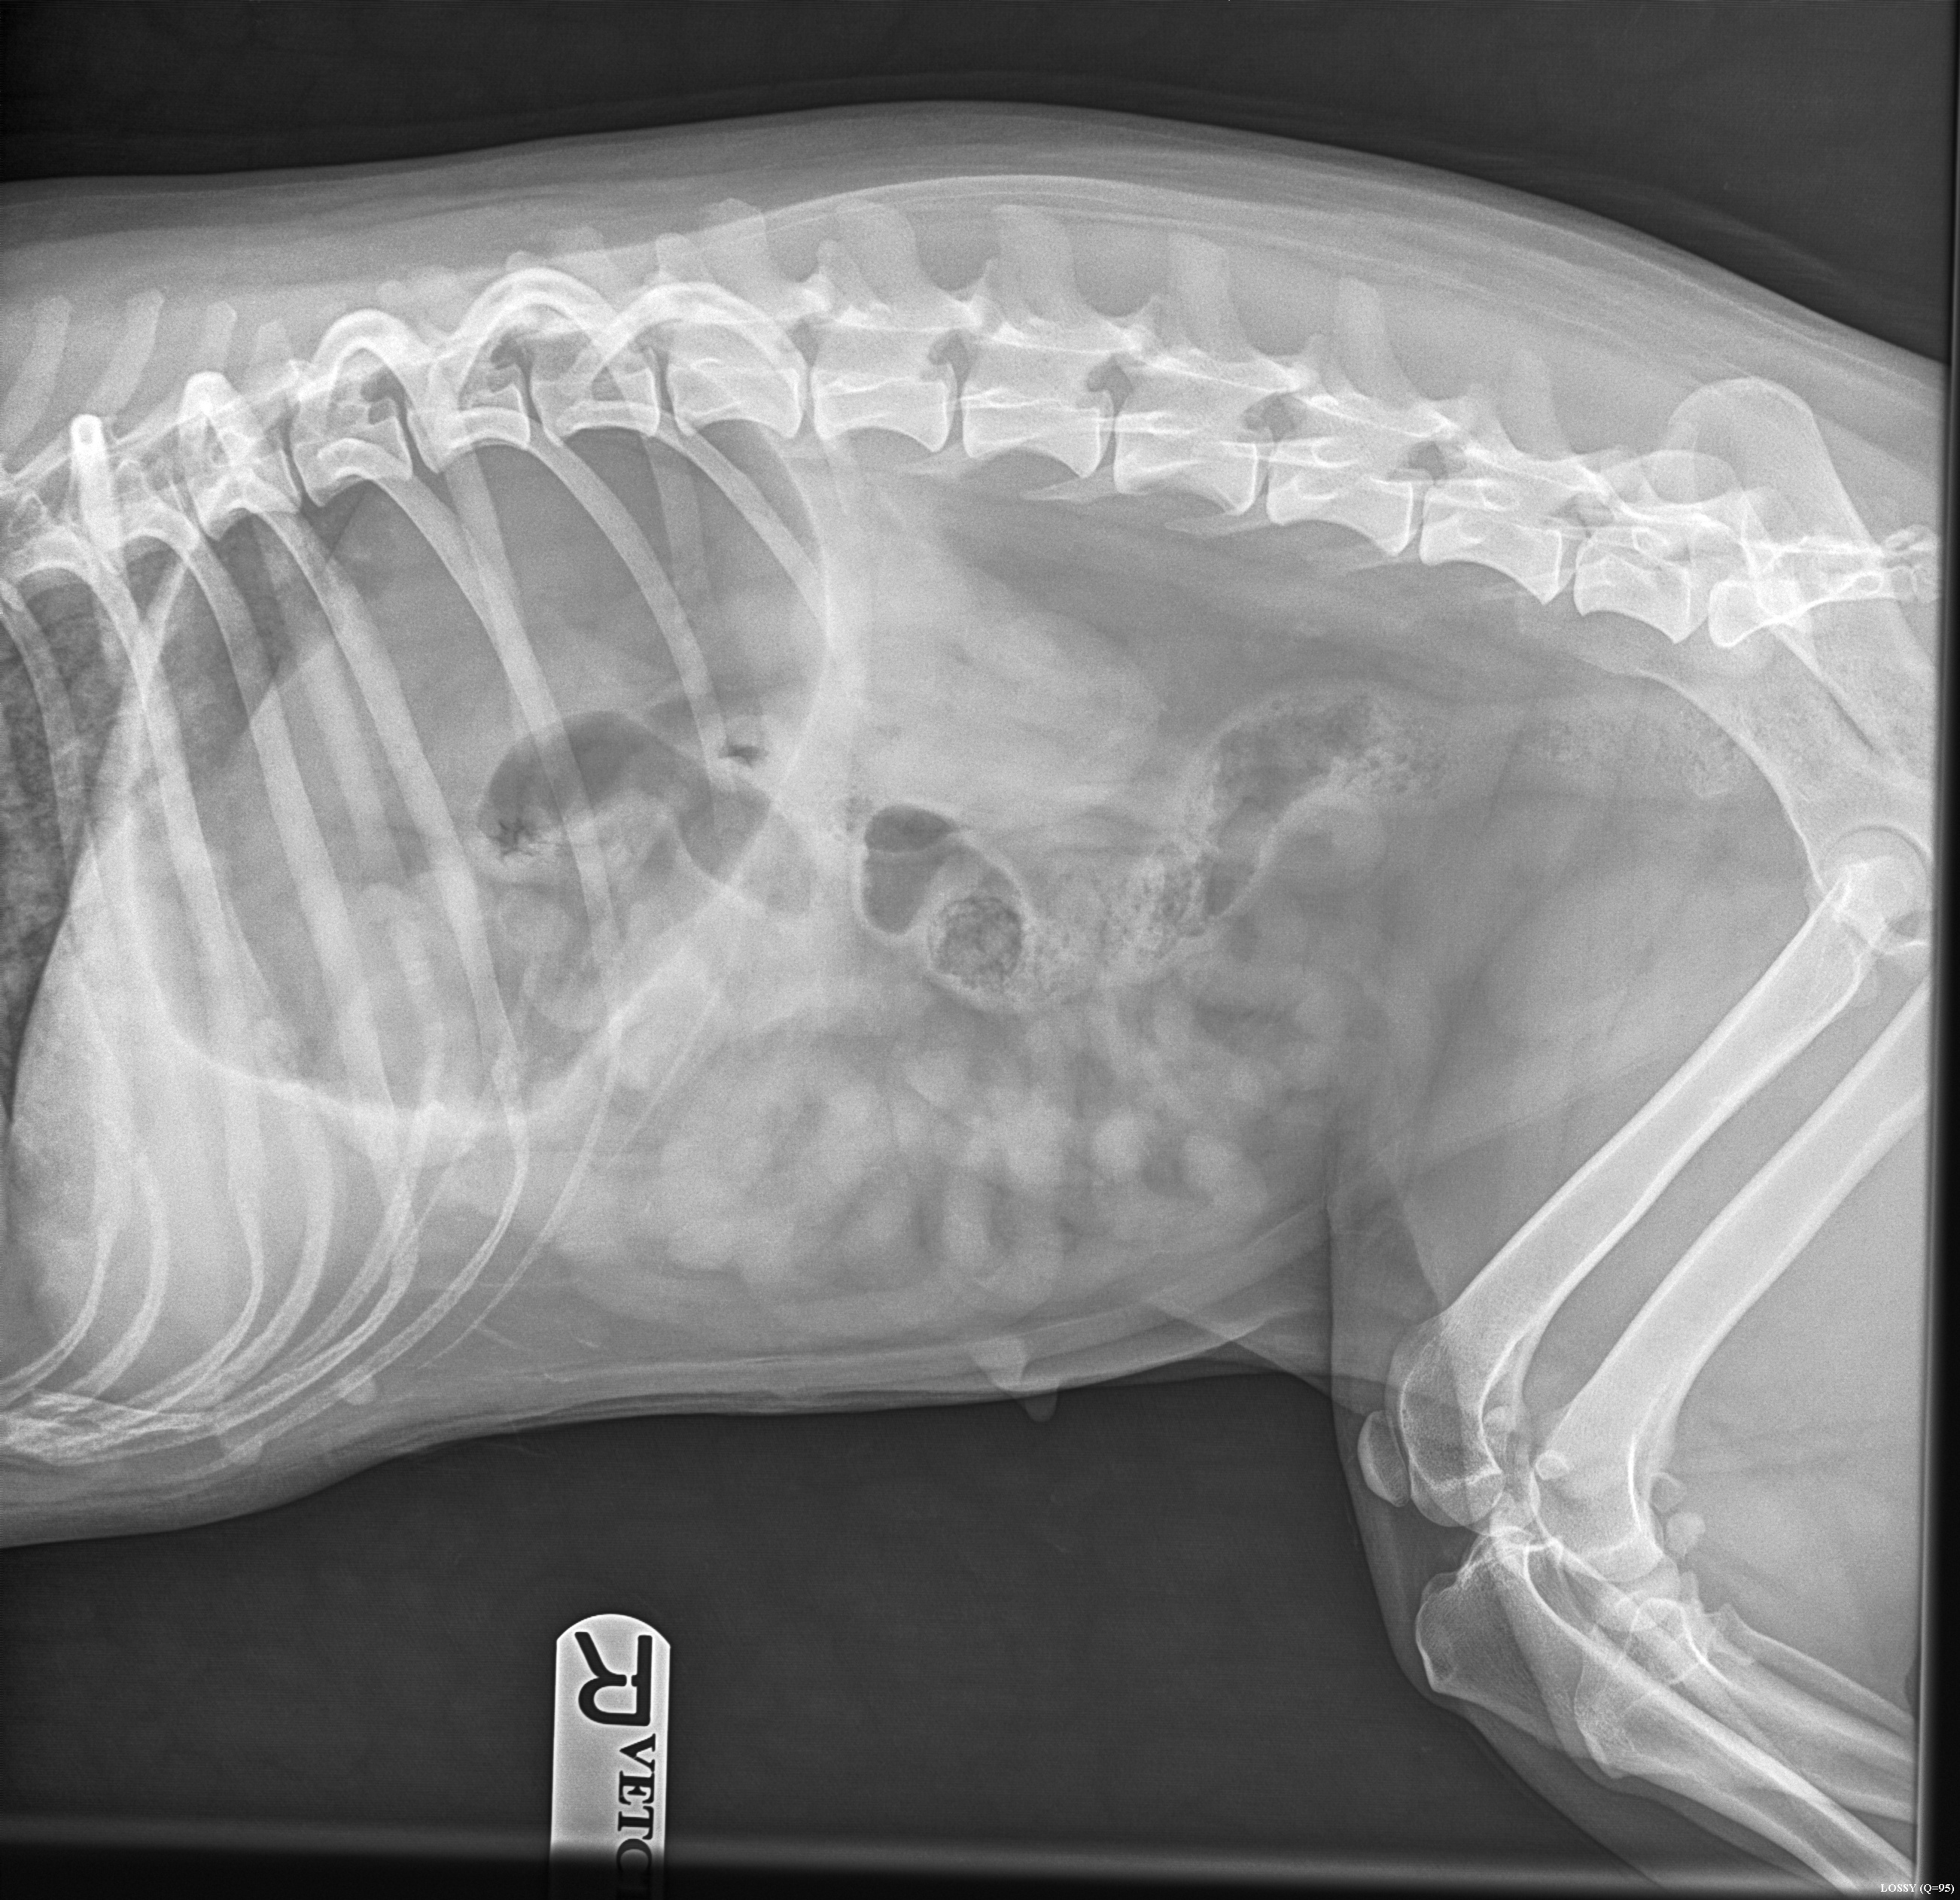 An Xray showing the lungworm in Jessie